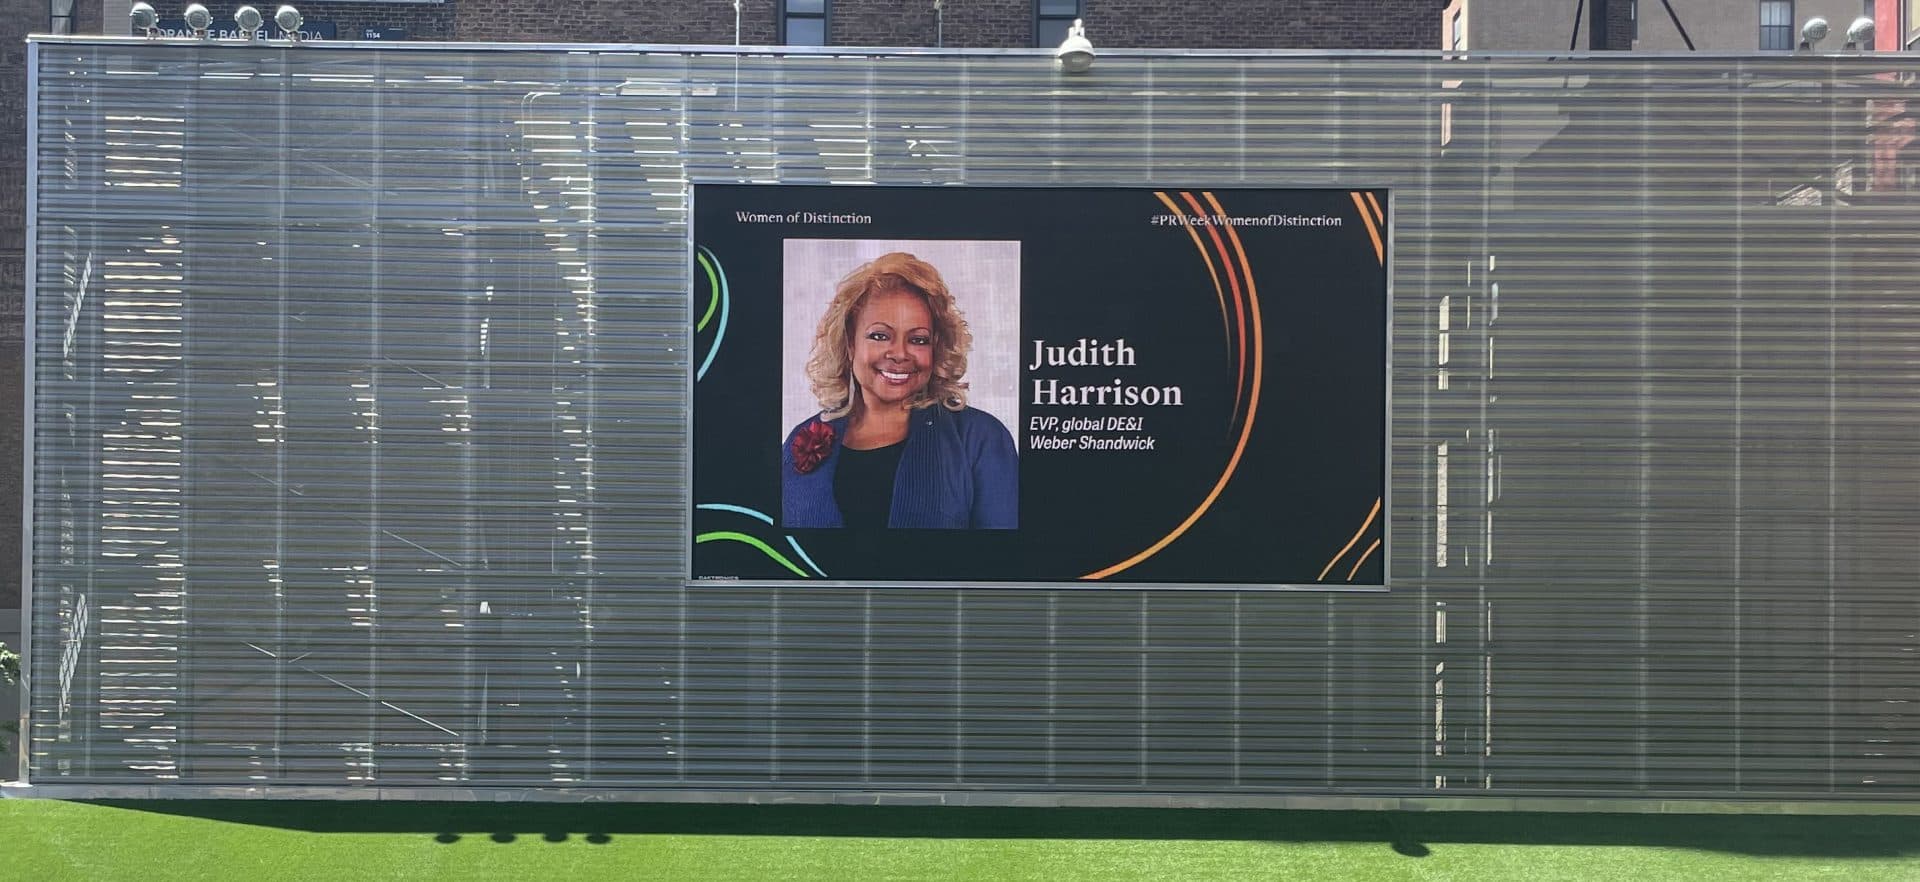 Judith Harrison Honored at PRWeek’s 2022 Women of Distinction Awards